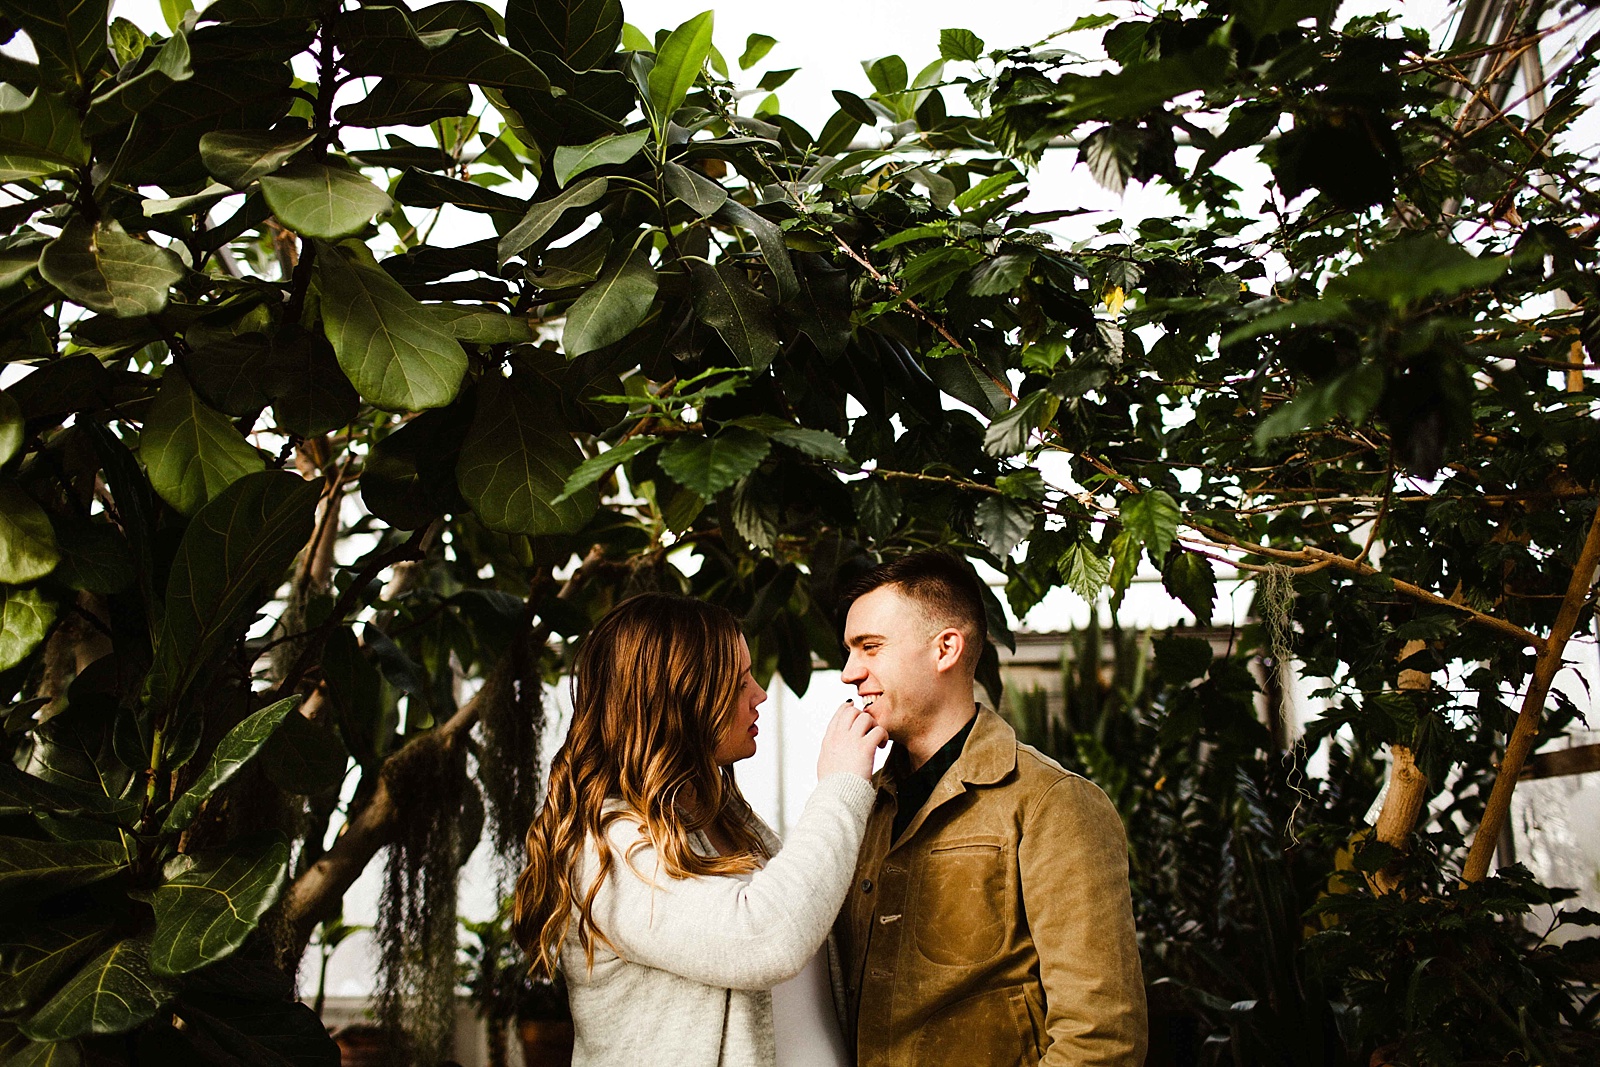 Anchorage Maternity Session at Mann Leiser Memorial Greenhouse